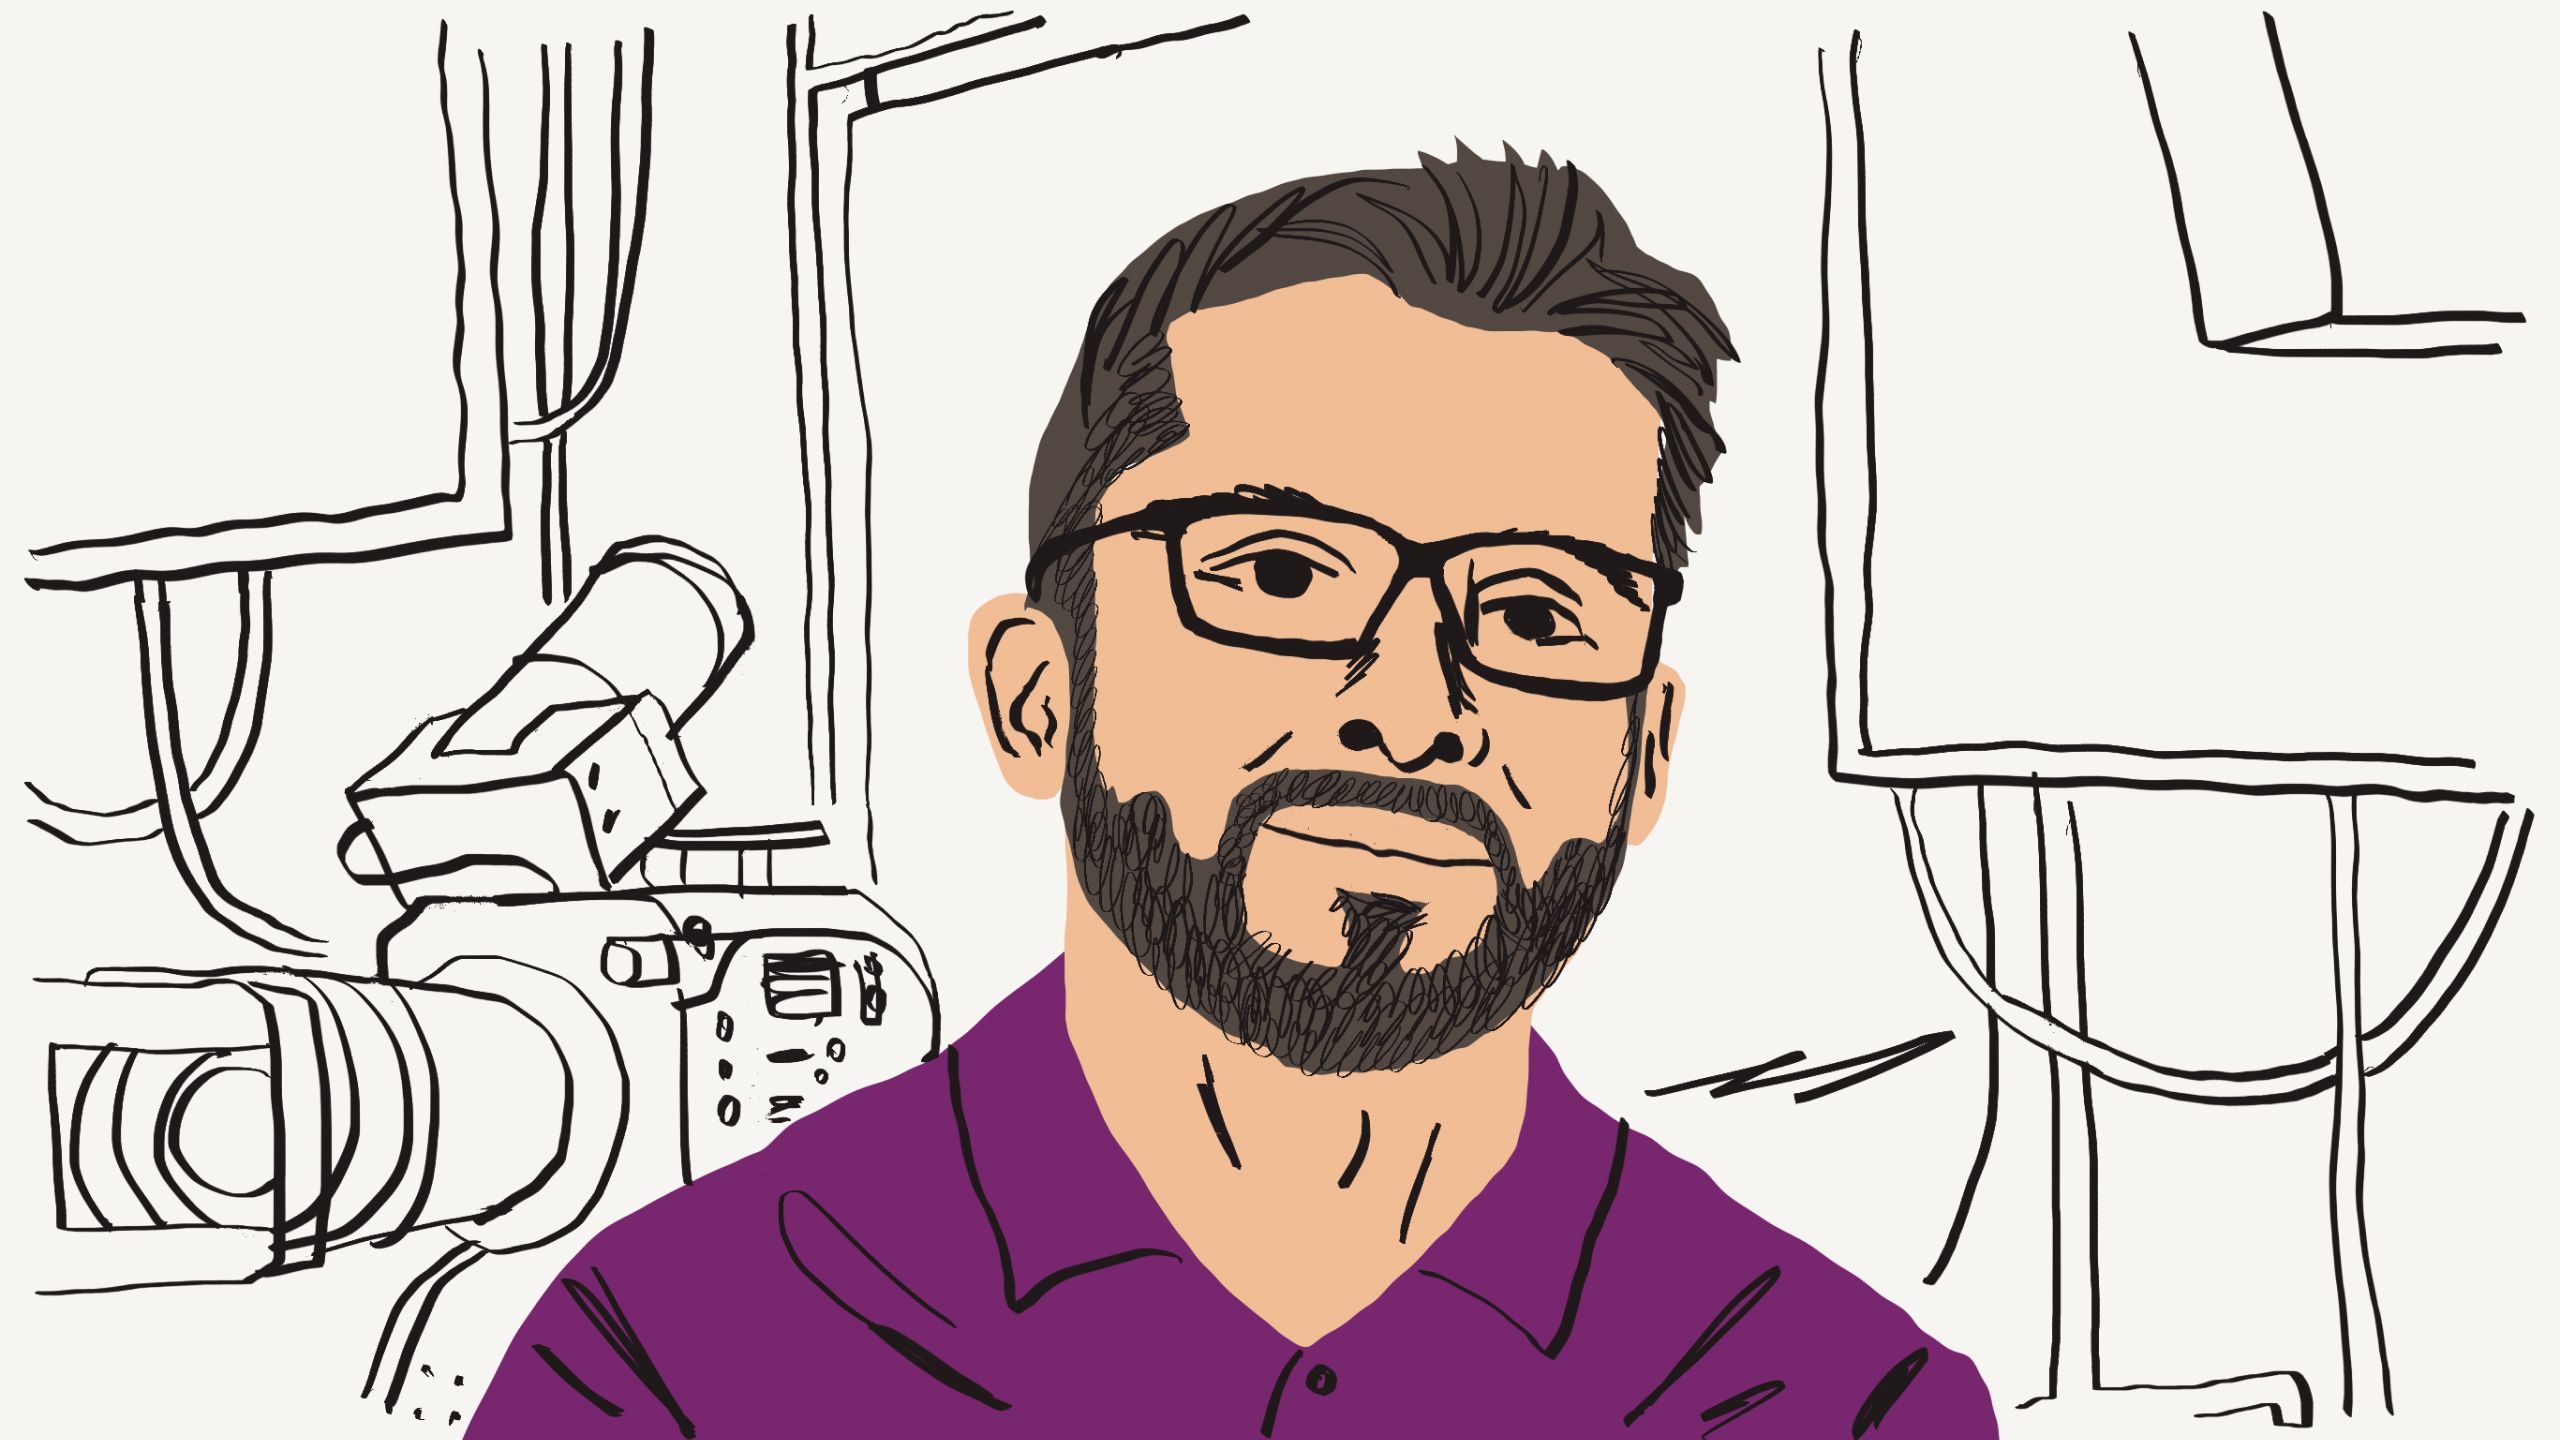 Illustration of a person with glasses wearing a purple shirt in front of a film camera